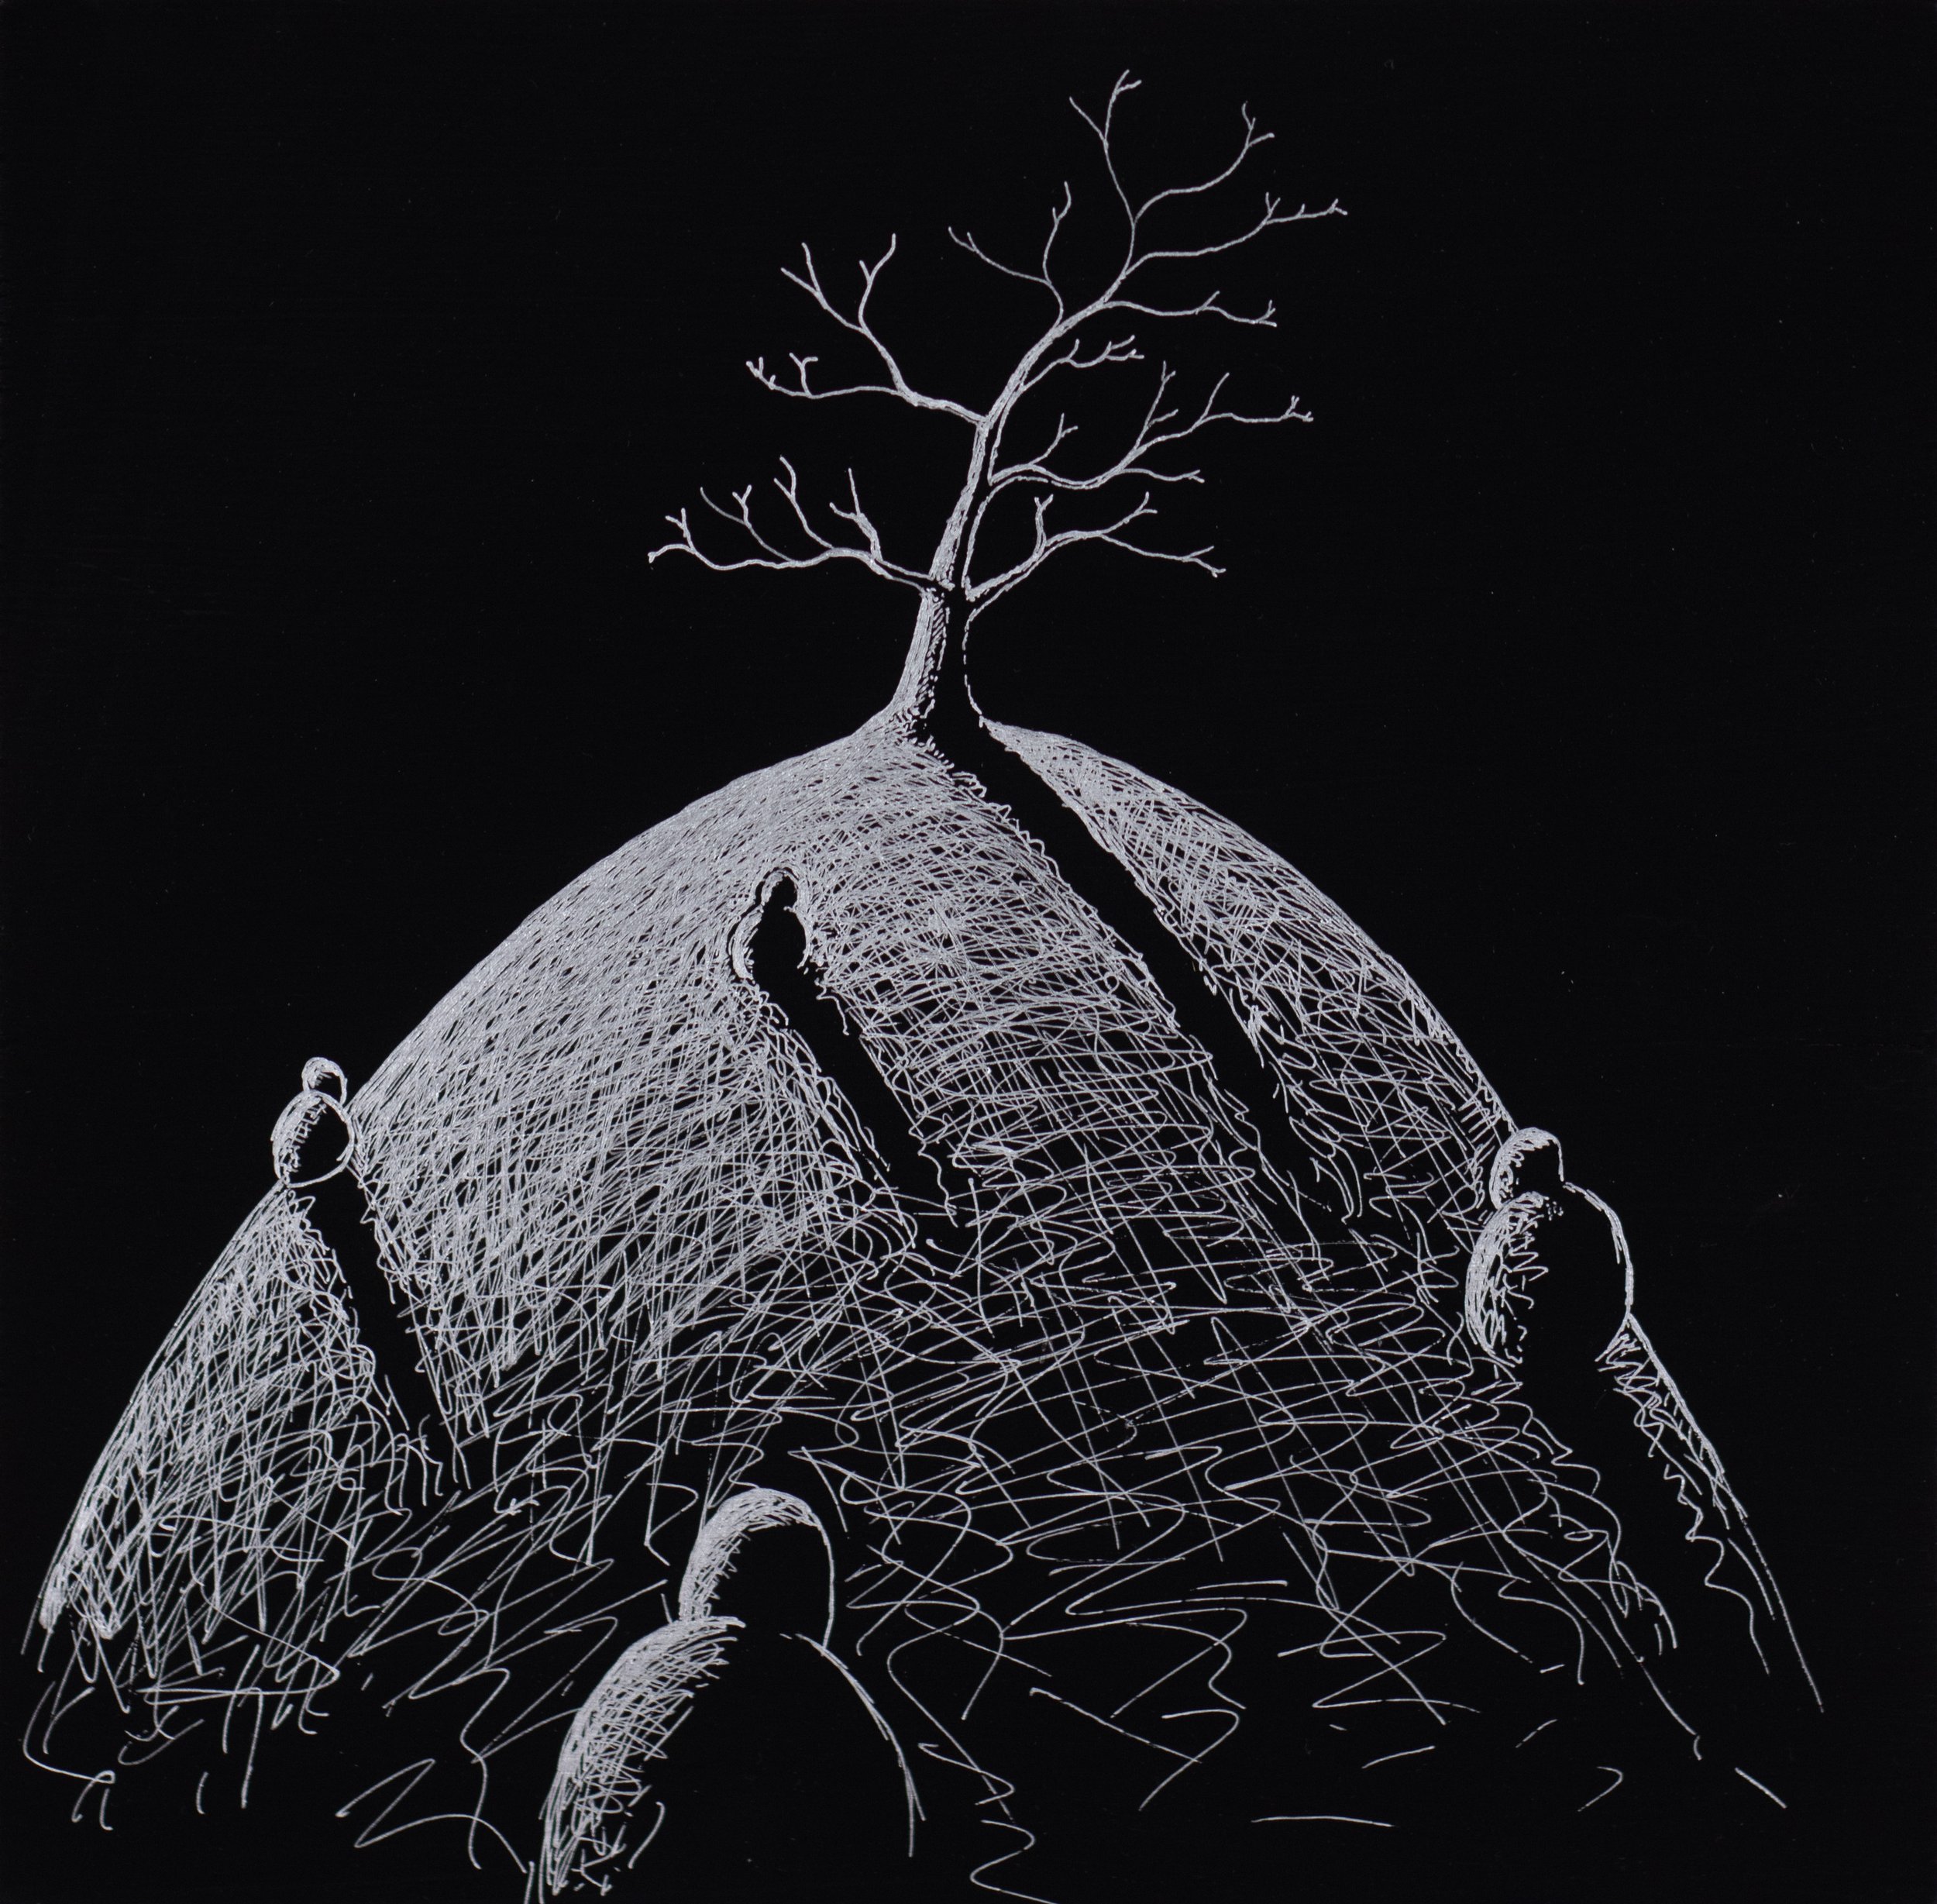 Growing • 10 x 10 • Silver pen on black panel • Sold